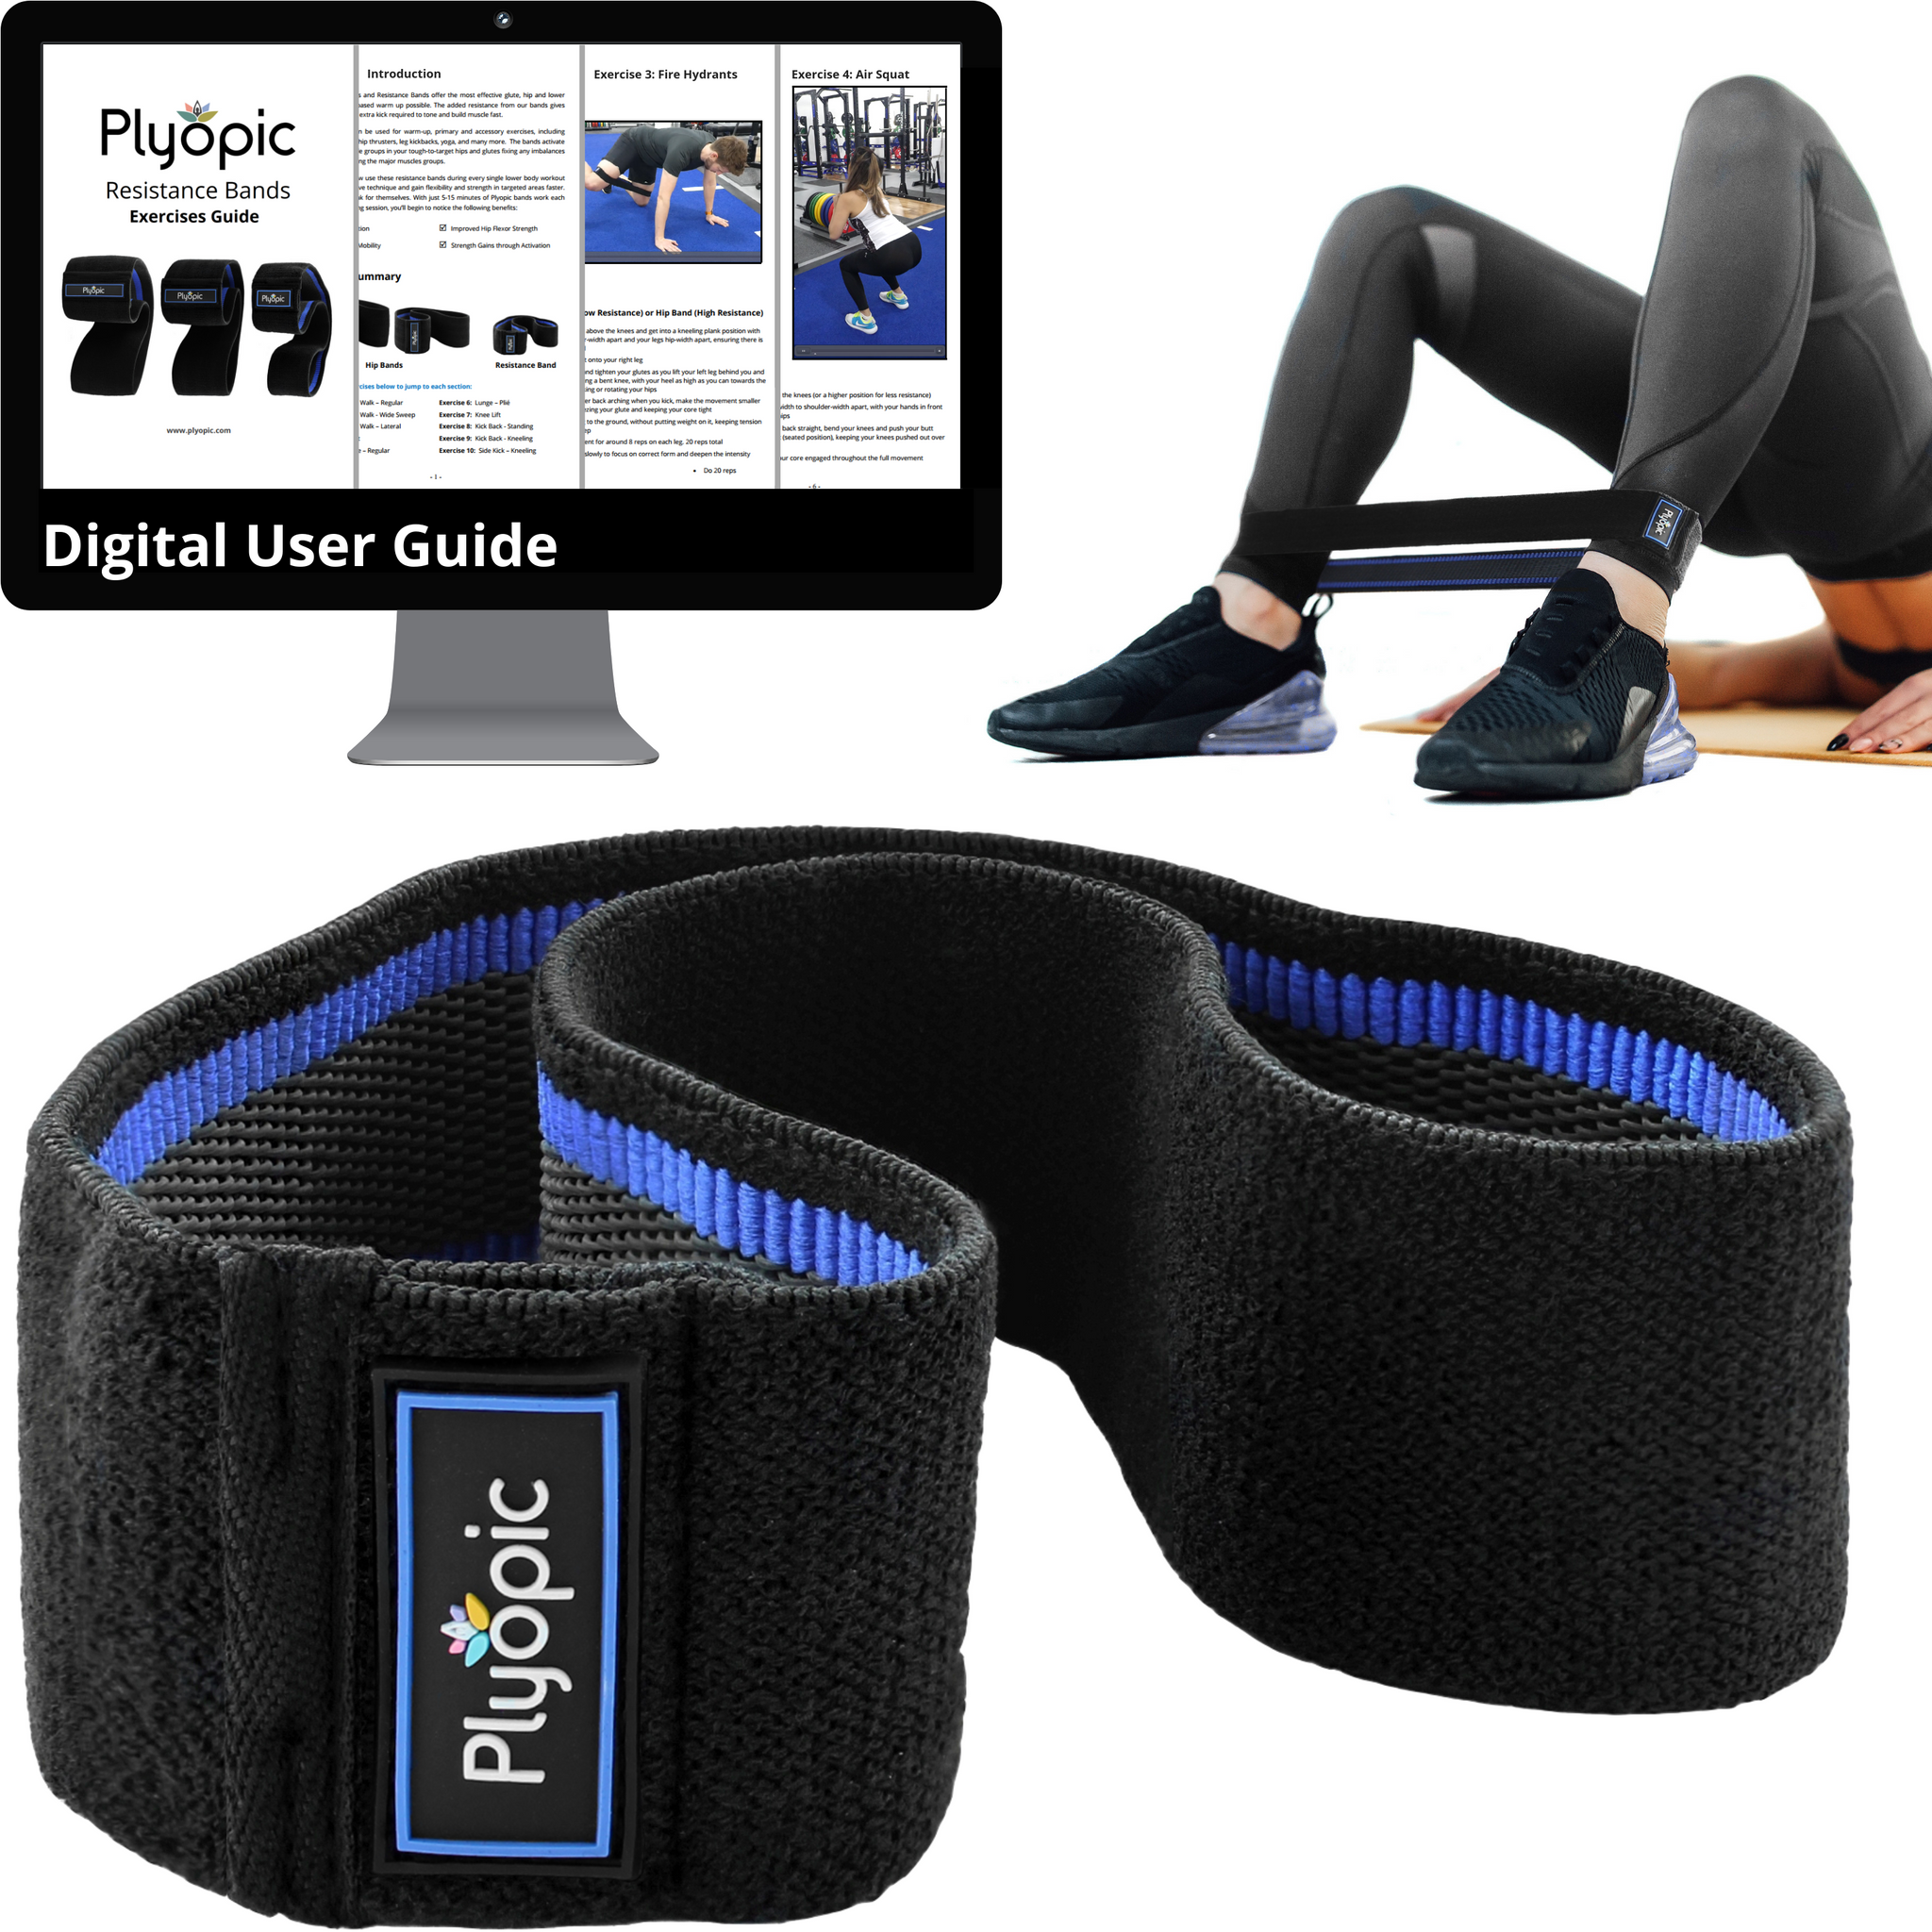 Plyopic-Resistance Band (For Lower Legs)-Hip Resistance Bands Digital User Guide and Resistance Band Worn on Woman Doing Hip Raisers